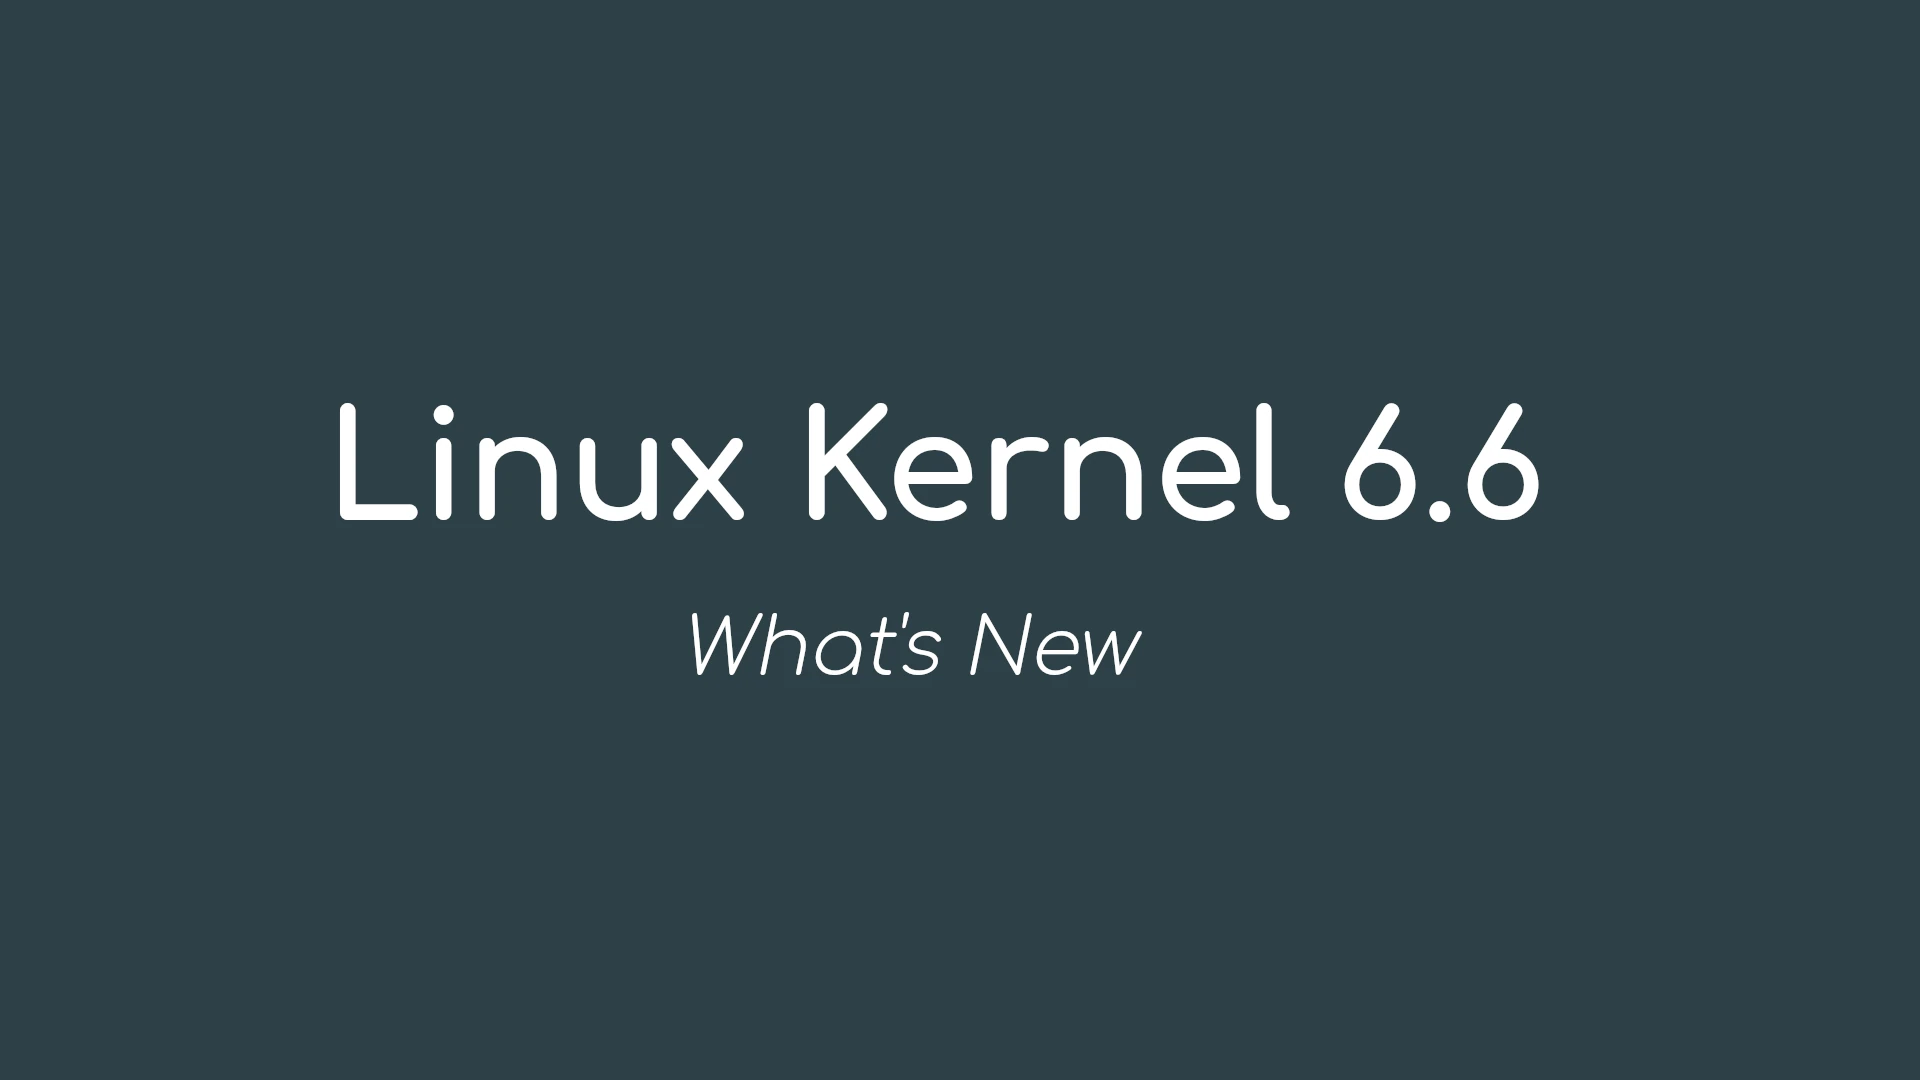 Linux Kernel 6.6 Officially Released, This Is What’s New